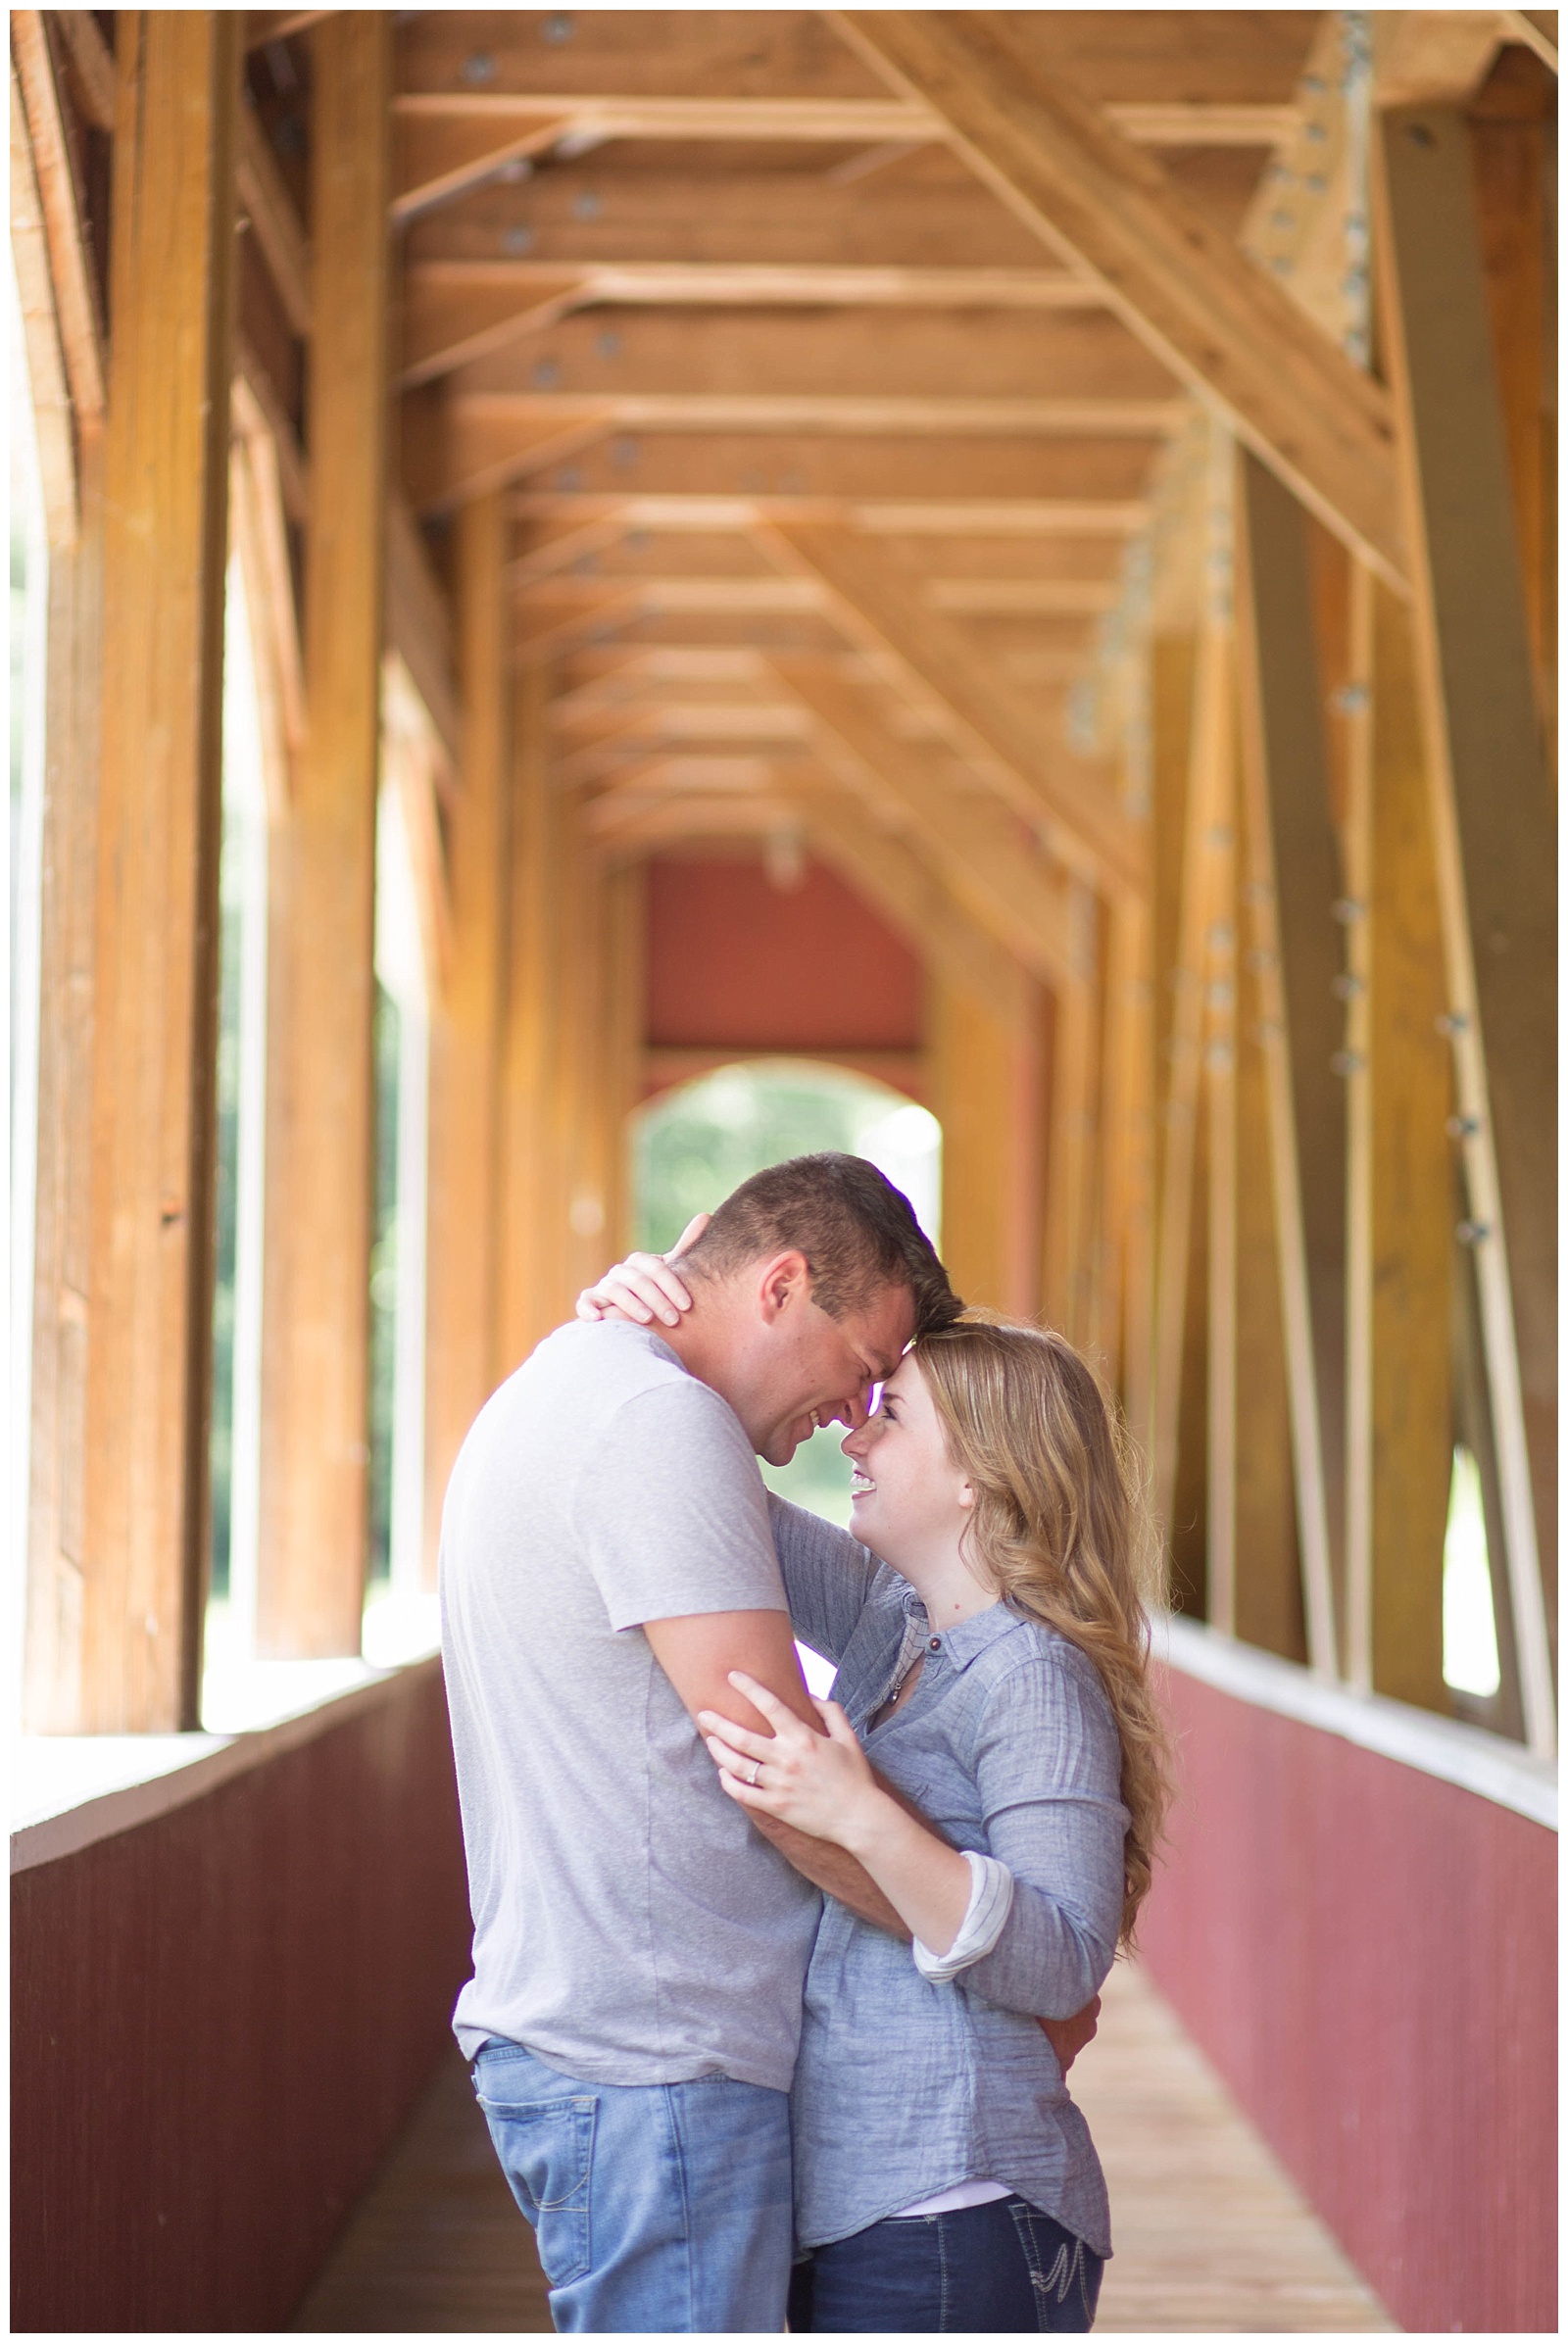 Nature Engagement Session | Monica Brown Photography | monicabrownphoto.com